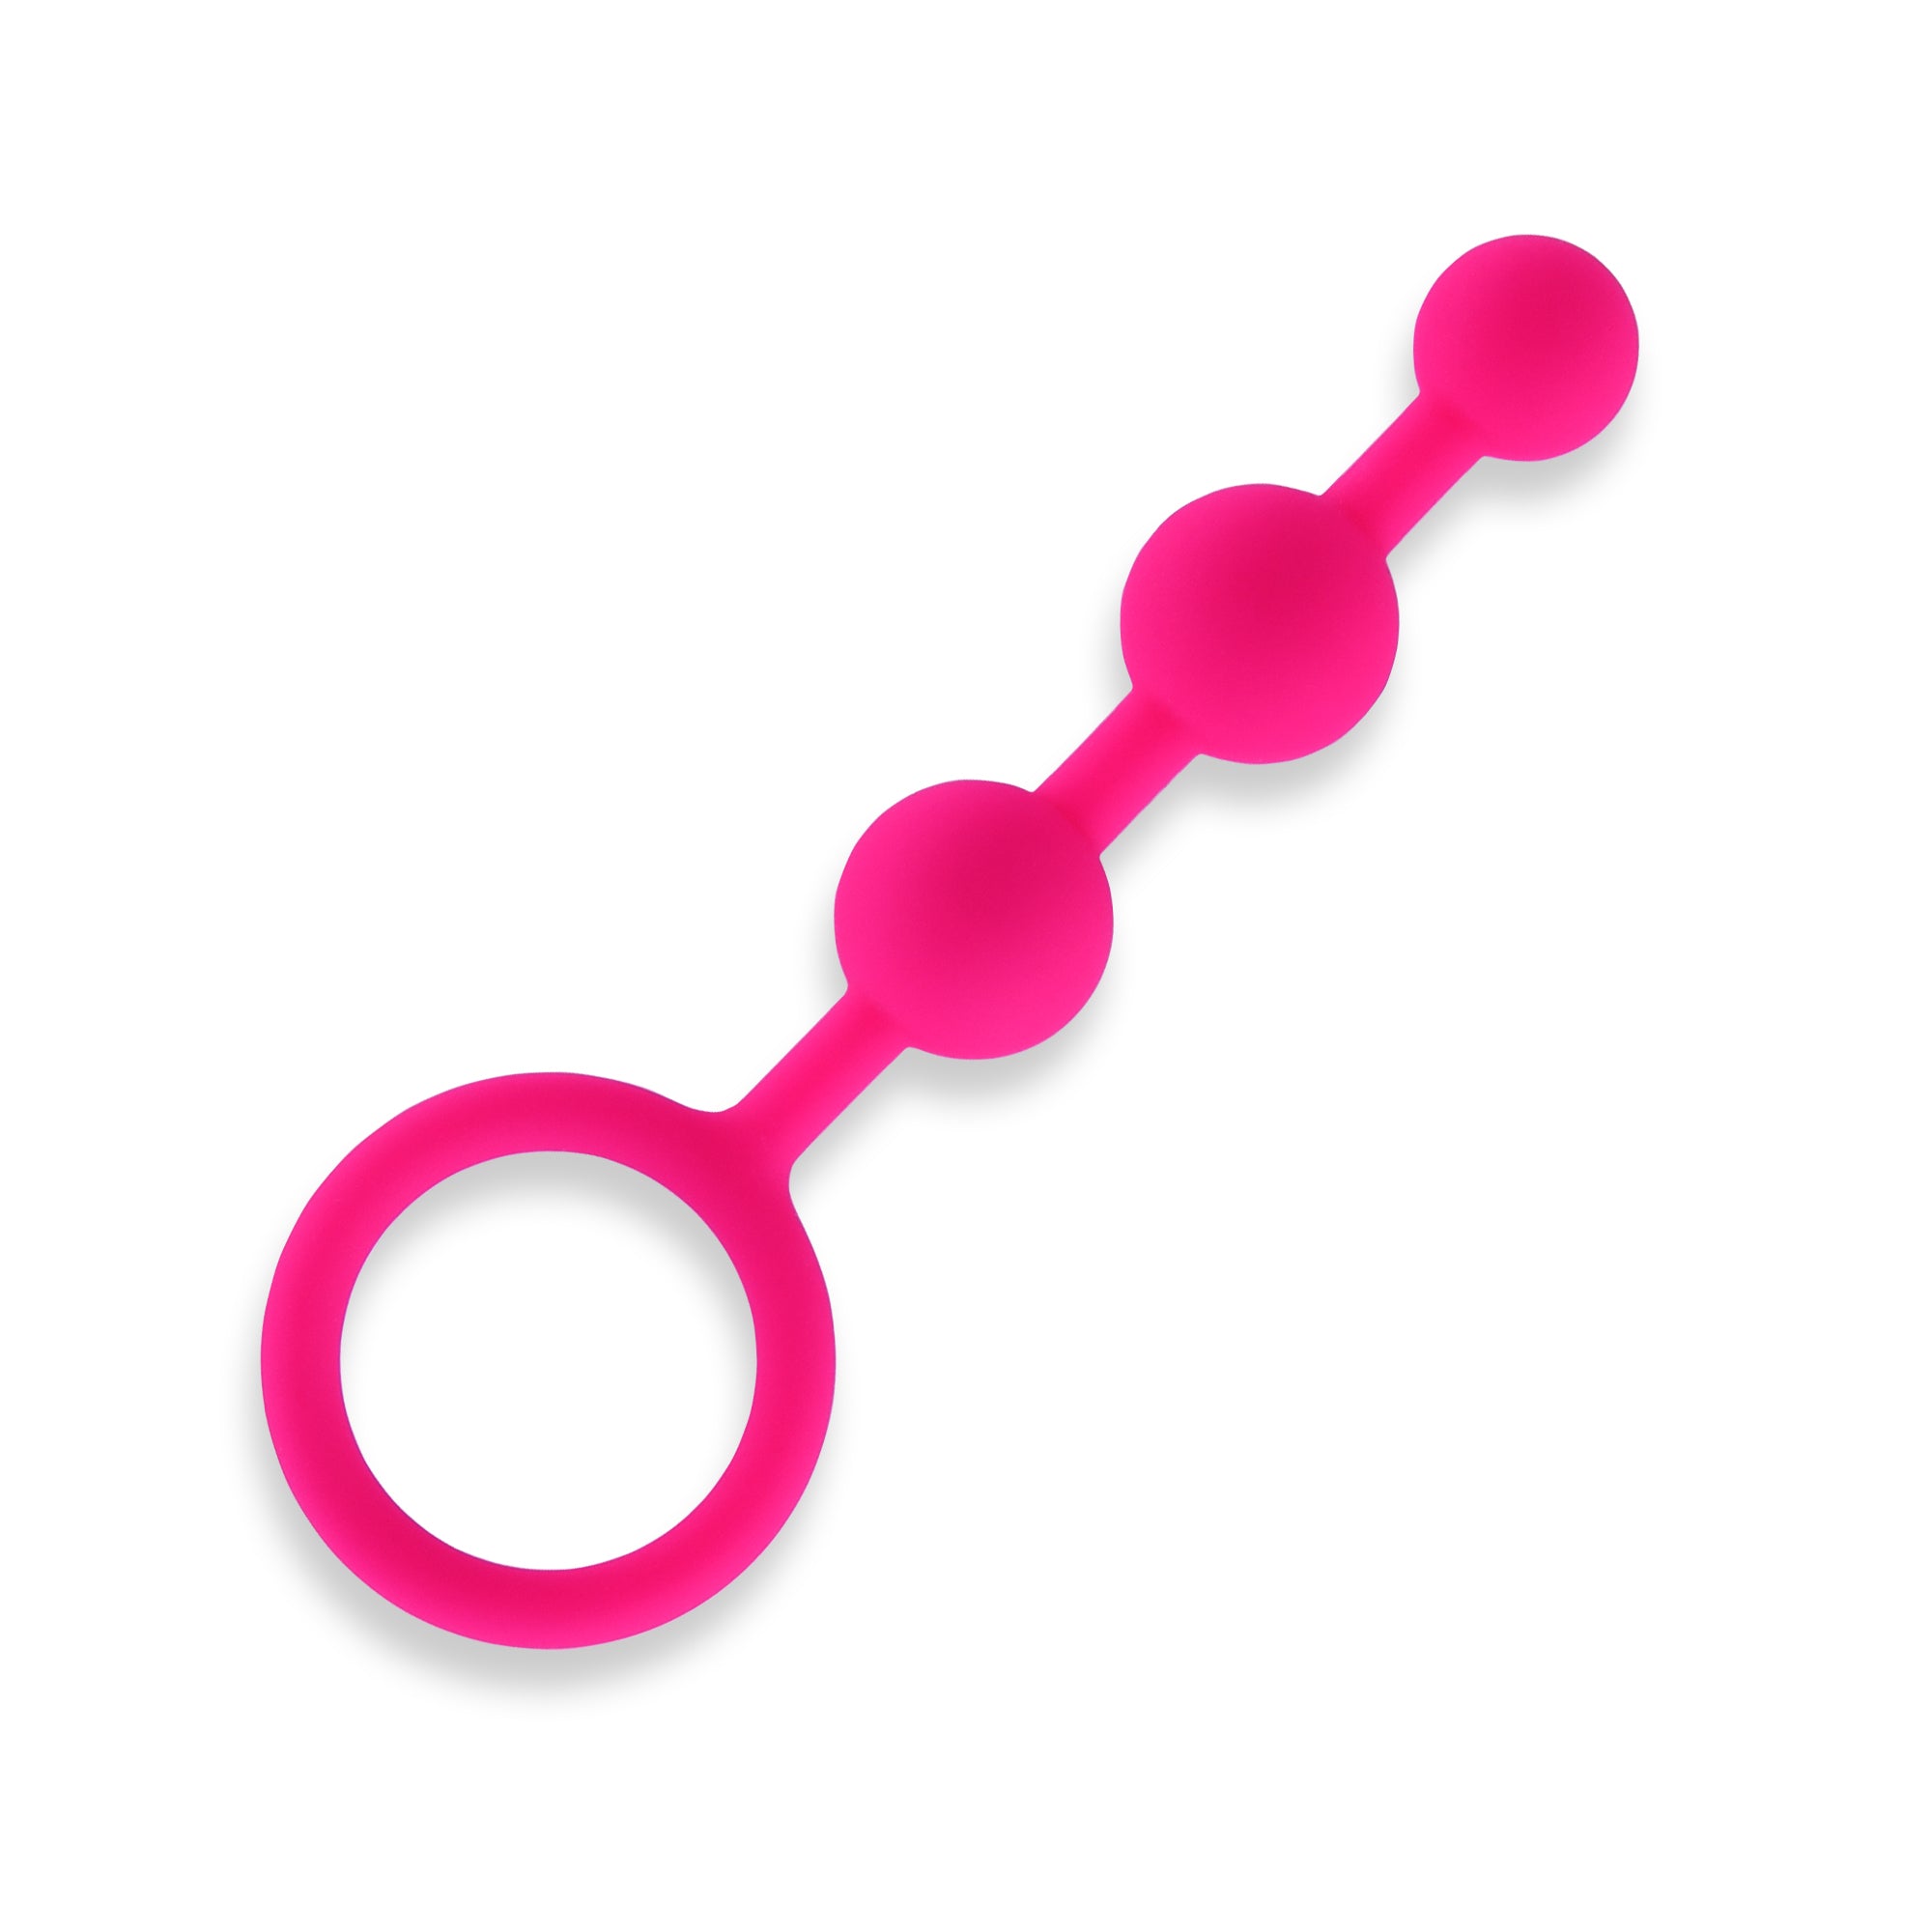 Hustler Body-Safe Silicone Anal Beads (3 Beads) in Pink at glastoy.com